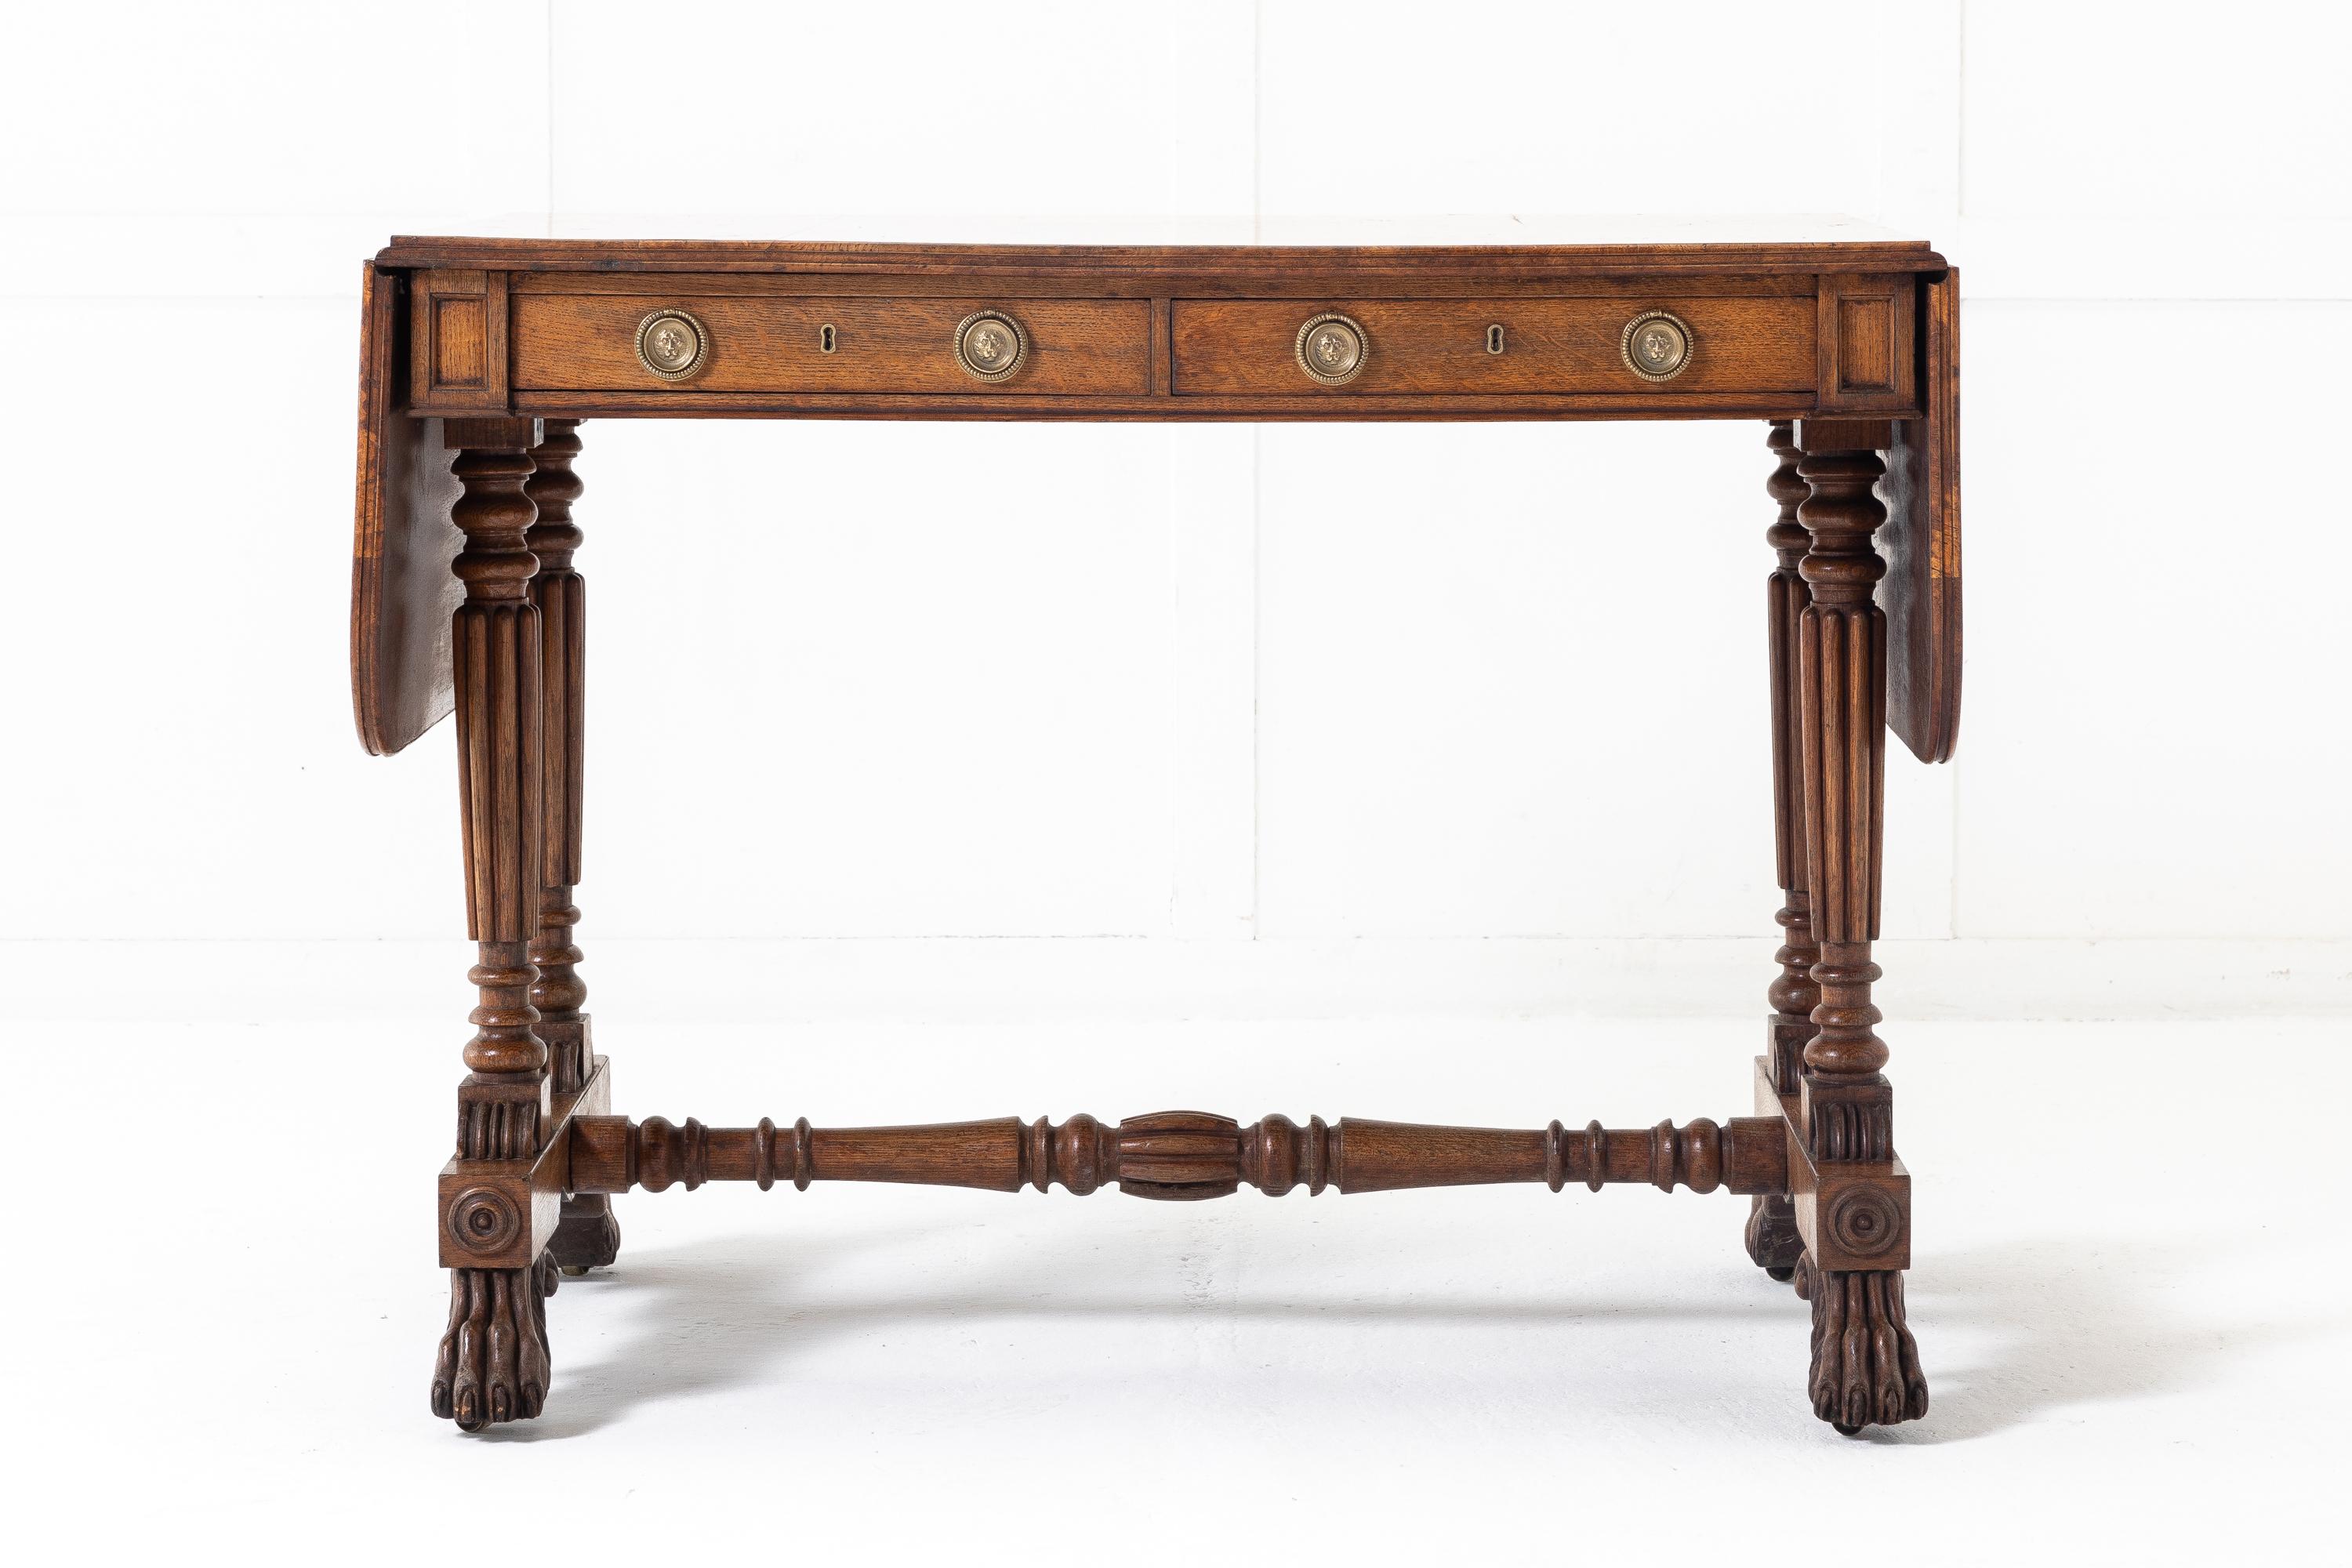 An important Regency oak and burr elm sofa table attributed to George Bullock. Having a moulded edge, burr elm top with outstanding colour. The frieze has two drawers and dummy drawers on the reverse side. Turned and fluted supports with fluted